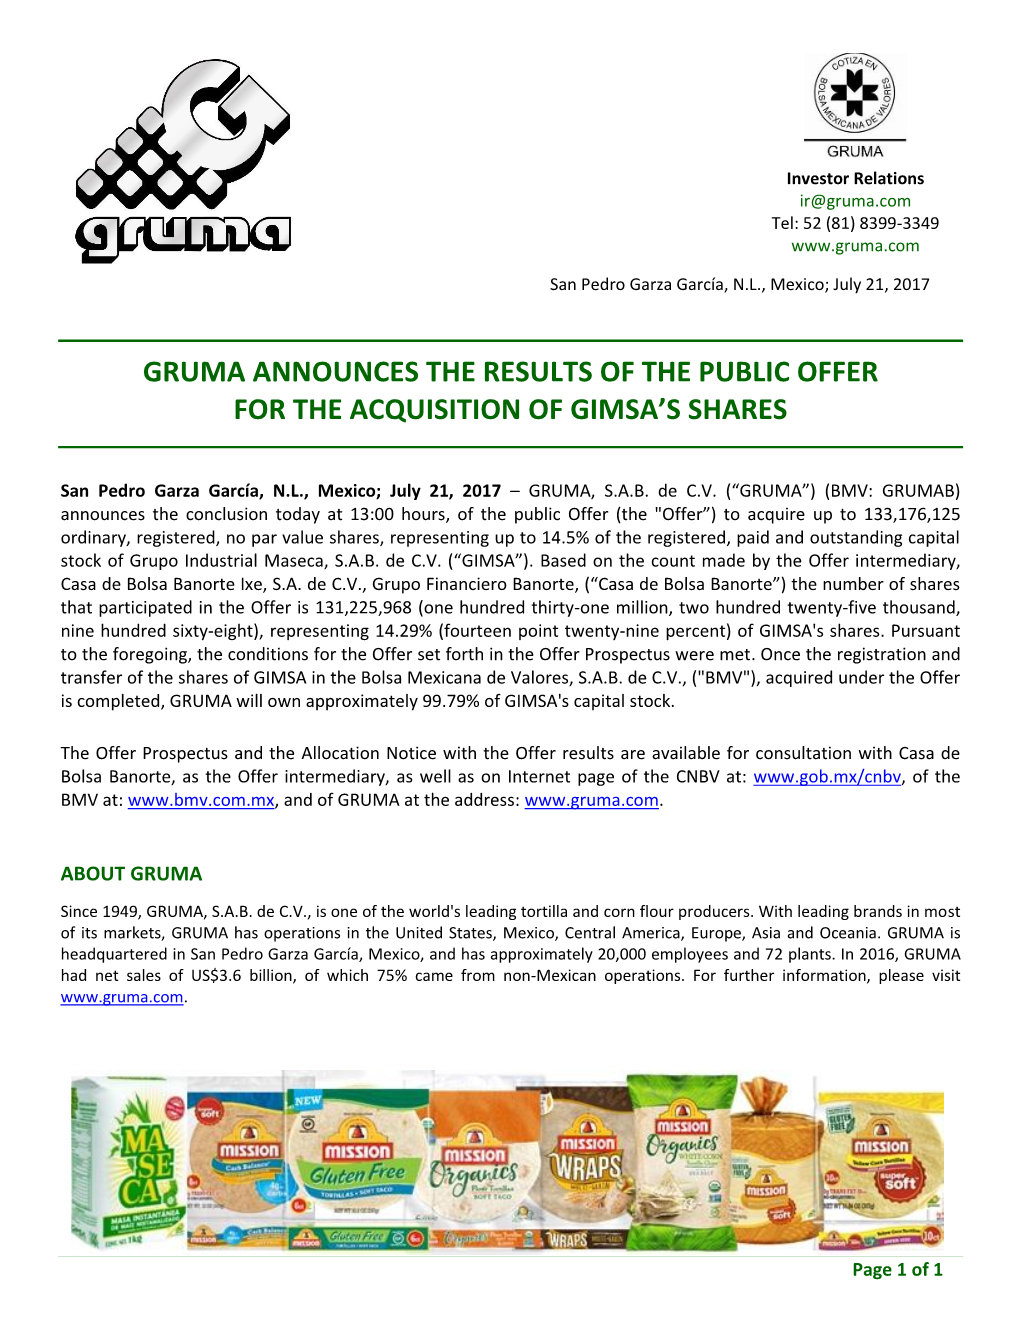 Gruma Announces the Results of the Public Offer for the Acquisition of Gimsa’S Shares